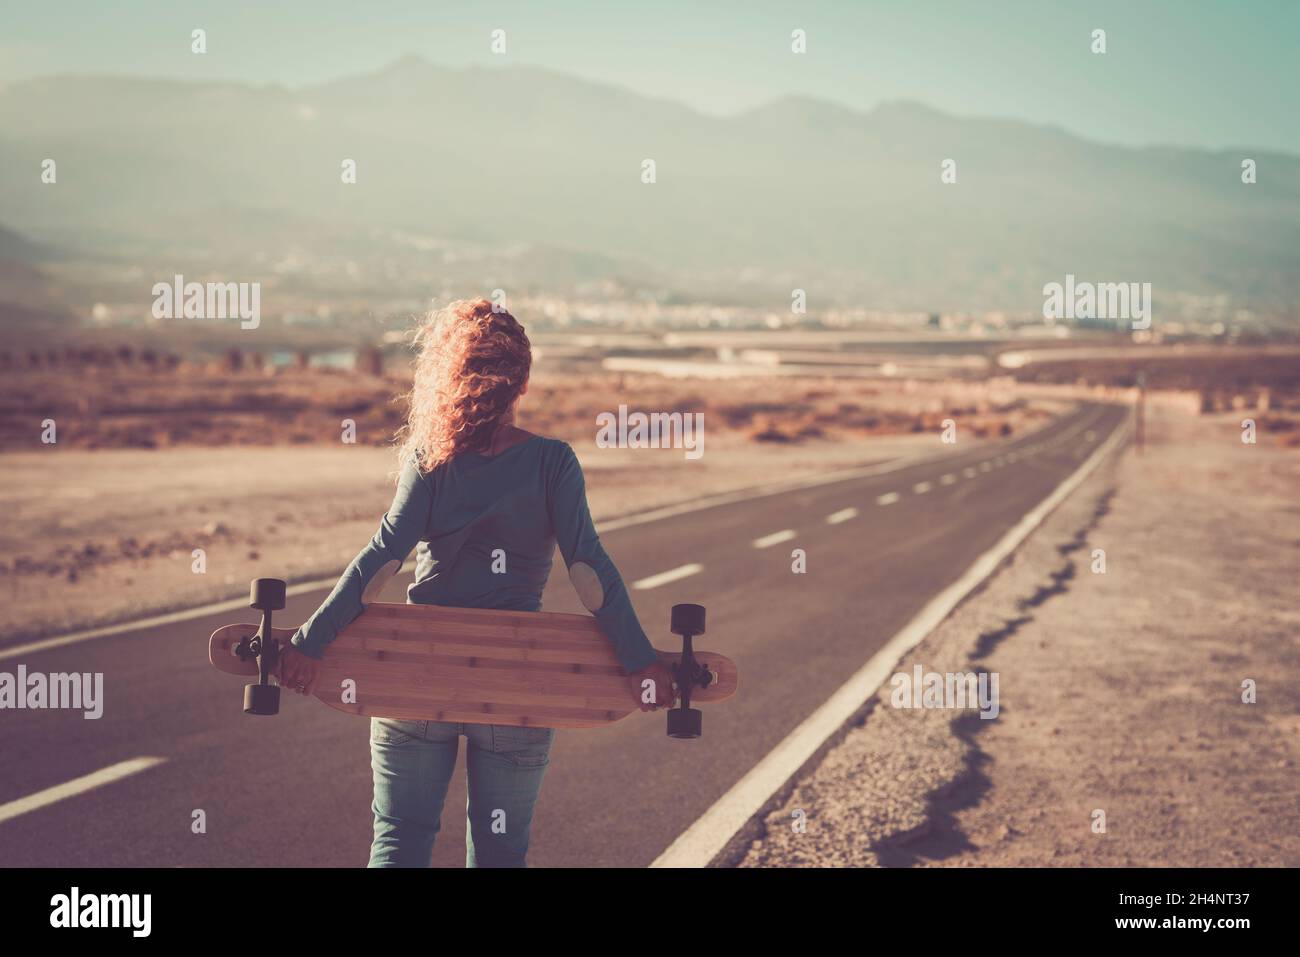 People travel and live freedom concept with standing woman walking on a straight road with long board. Back view. People and adventure destination lif Stock Photo